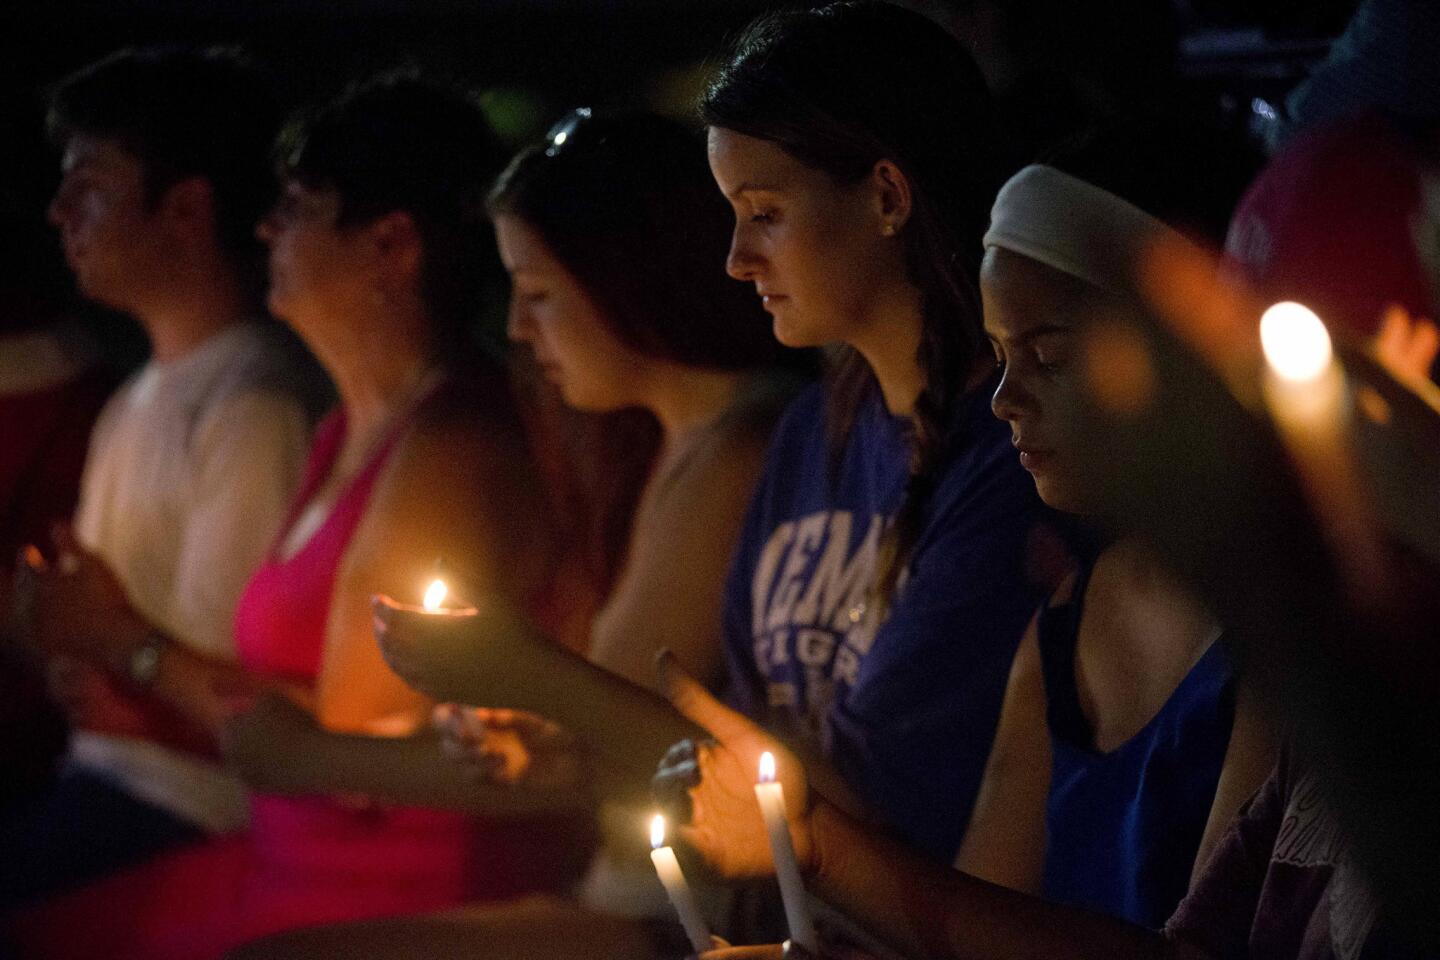 Mourners attend a vigil to honor the victims of Thursday night's shooting at The Grand 16 theater in Lafayette, La.